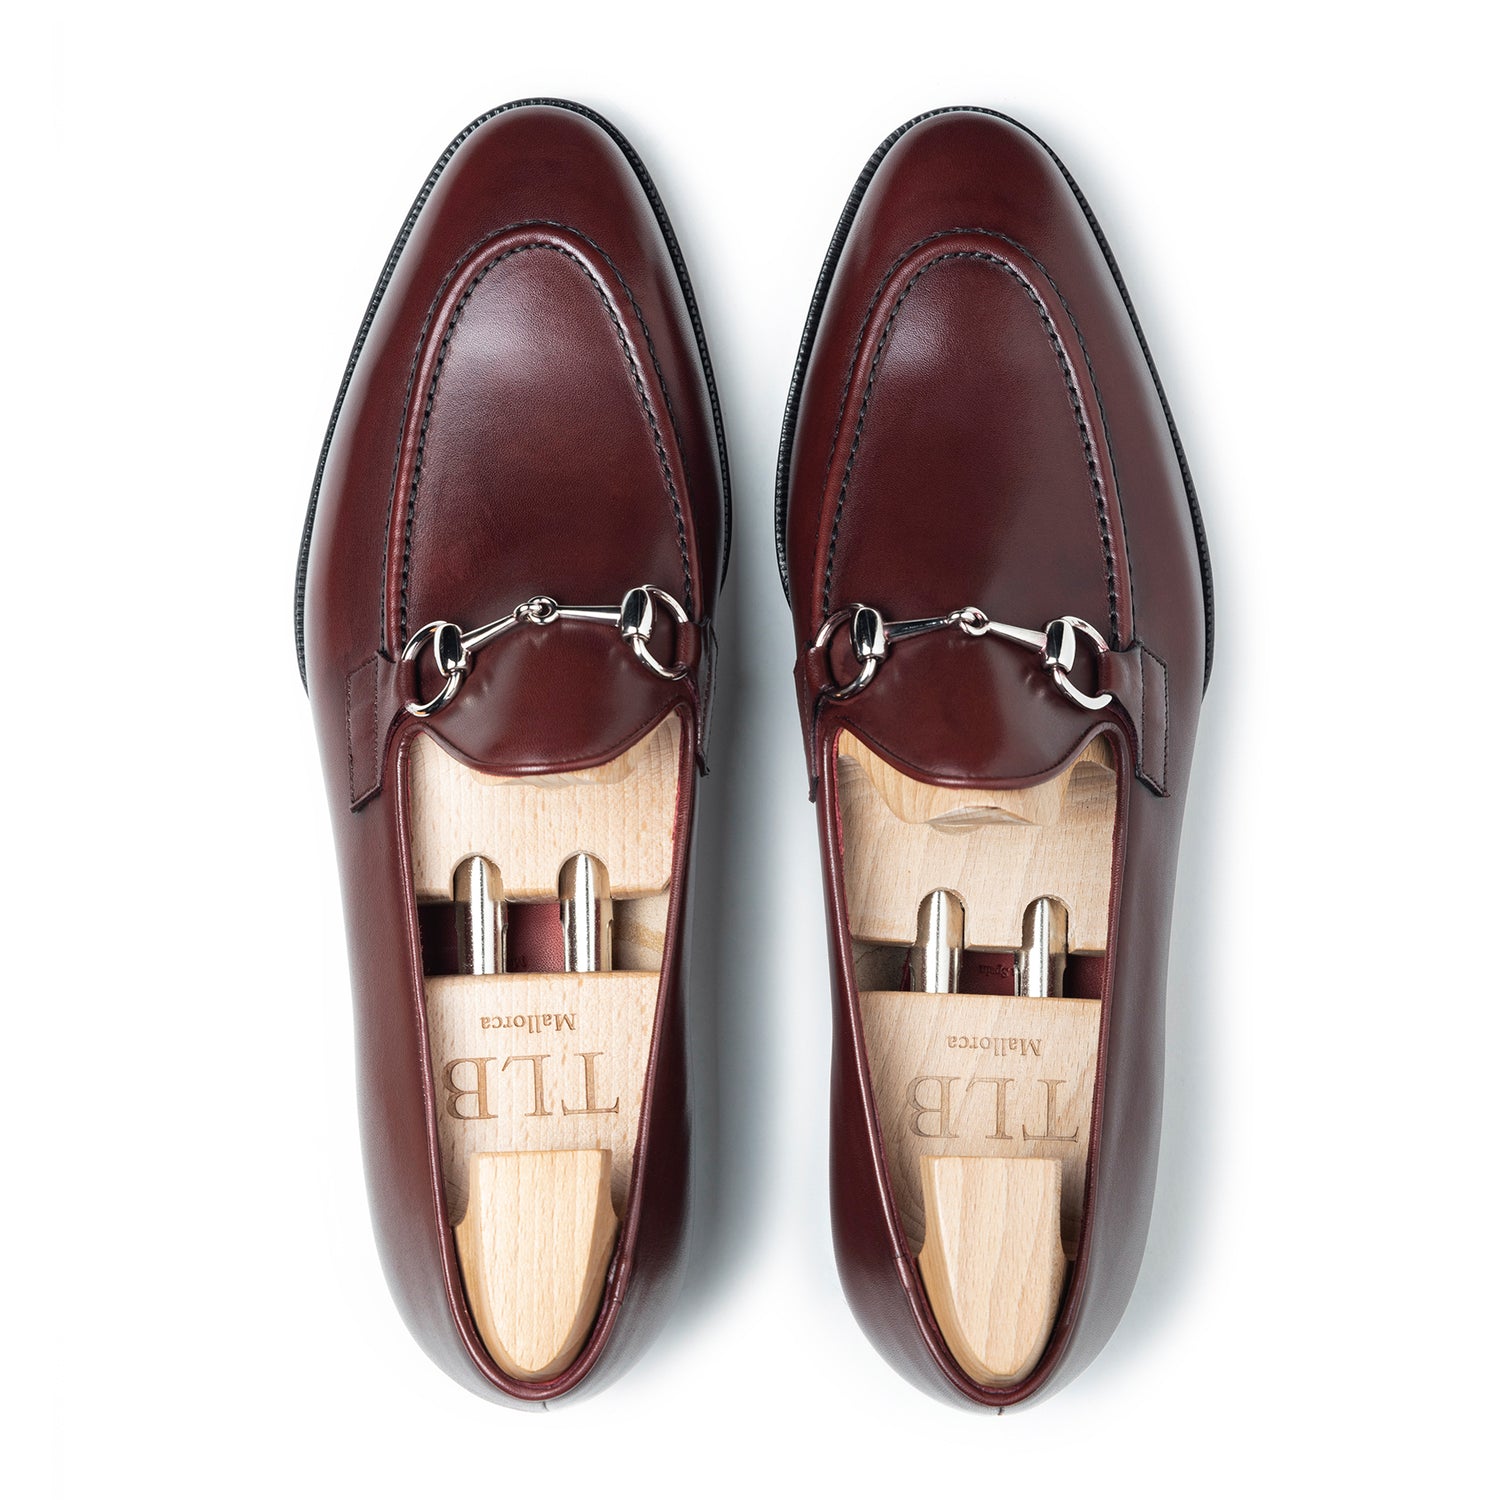 TLB Mallorca  Leather Men's loafers shoes made in Spain